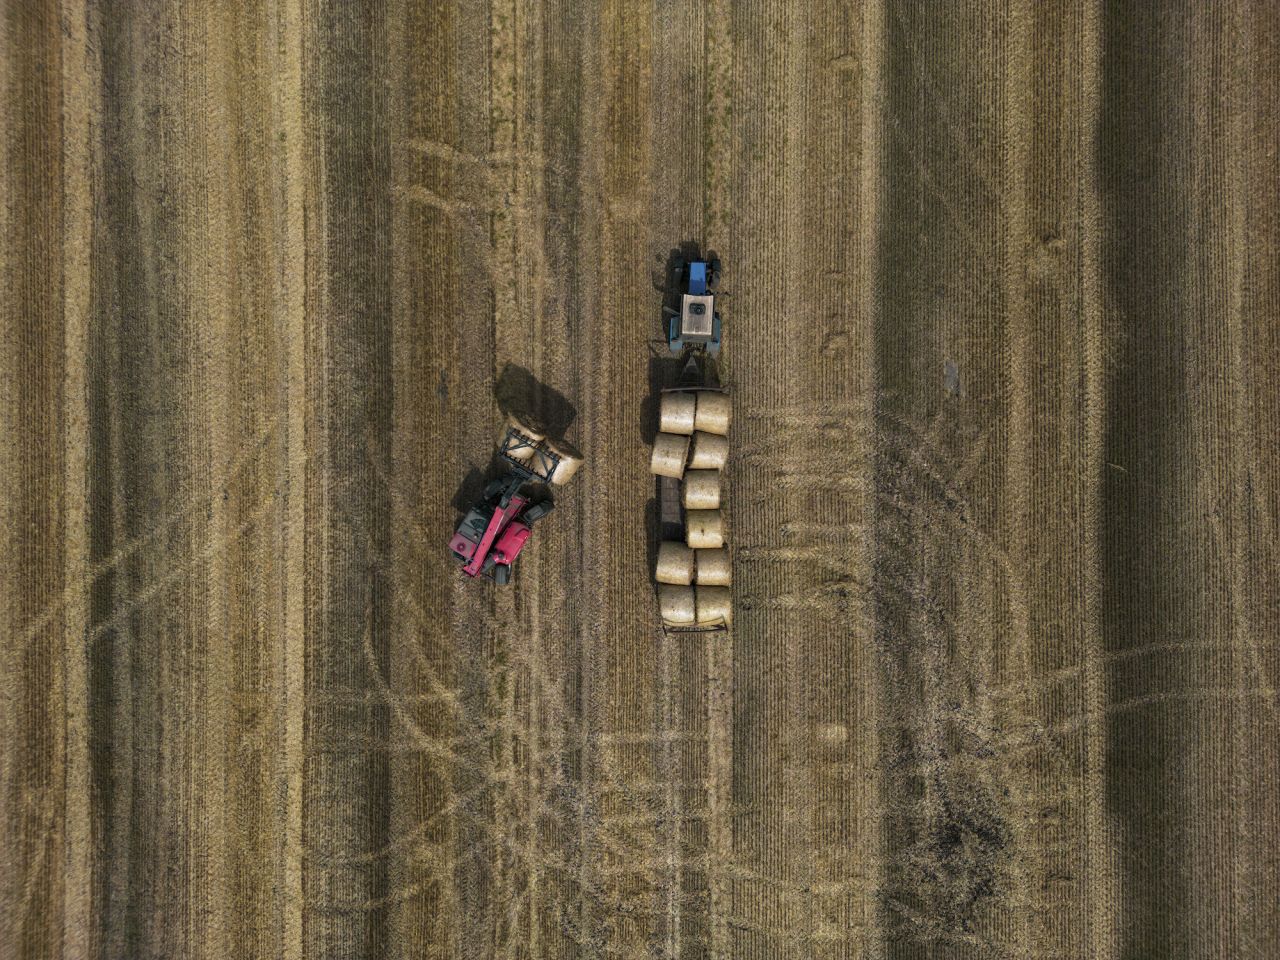 This photo, taken with a drone on Thursday, August 10, shows agricultural machinery on a farm in Ukraine's Kyiv region. Last month, Russia said it was suspending its participation in a crucial deal that allowed the export of Ukrainian grain. <a href="https://www.cnn.com/2023/07/17/business/grain-deal-global-food-prices-explainer/index.html" target="_blank">The collapse of the pact</a> threatened to push up food prices for consumers worldwide and tip millions into hunger.